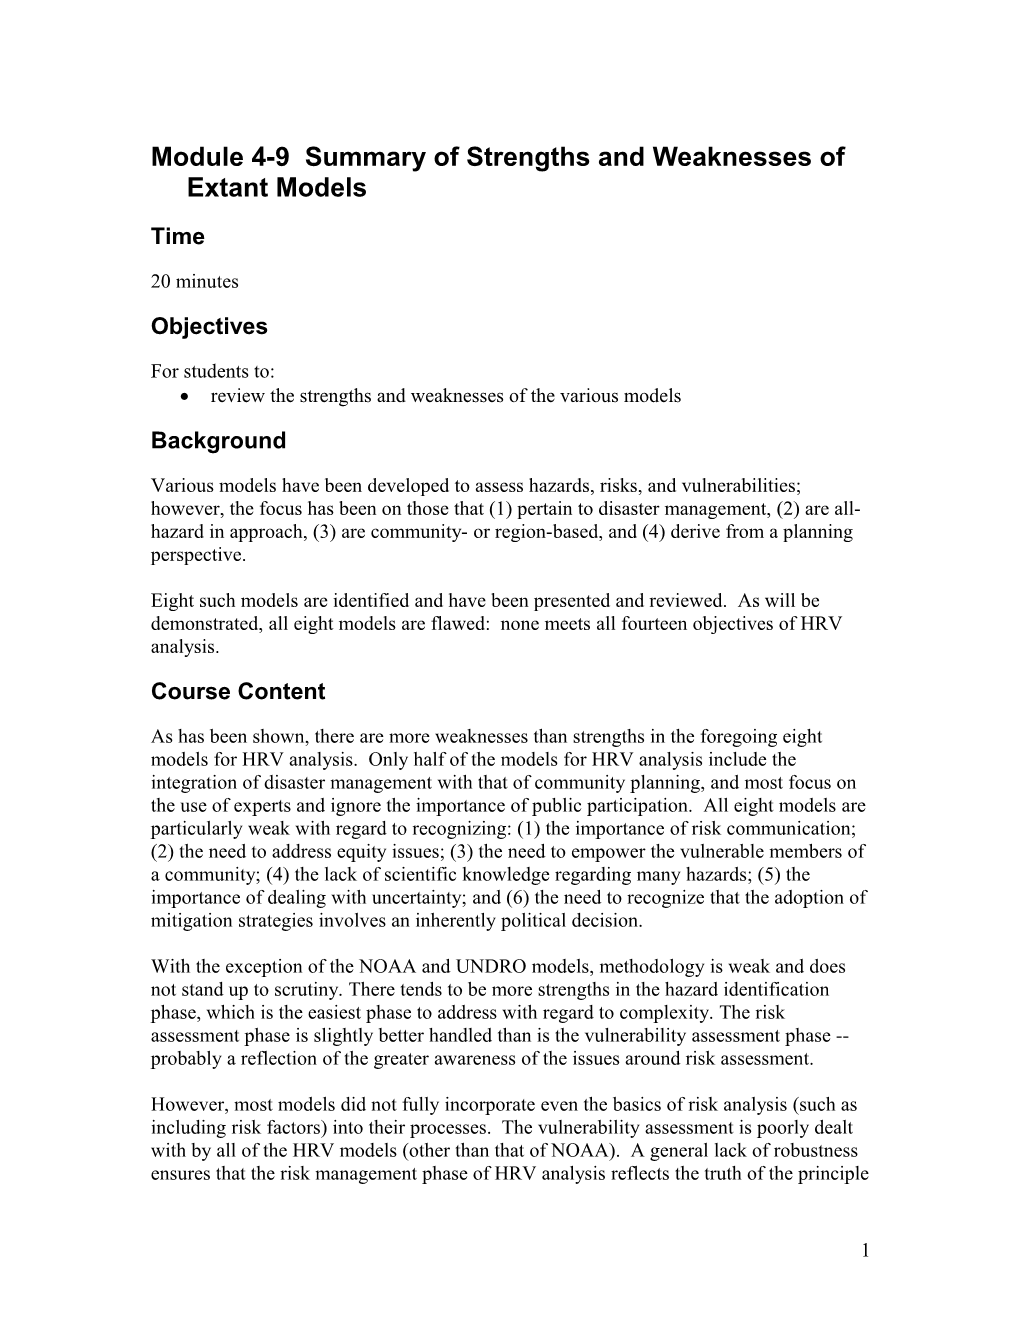 Module 4-9 Summary of Strengths and Weaknesses of Extant Models